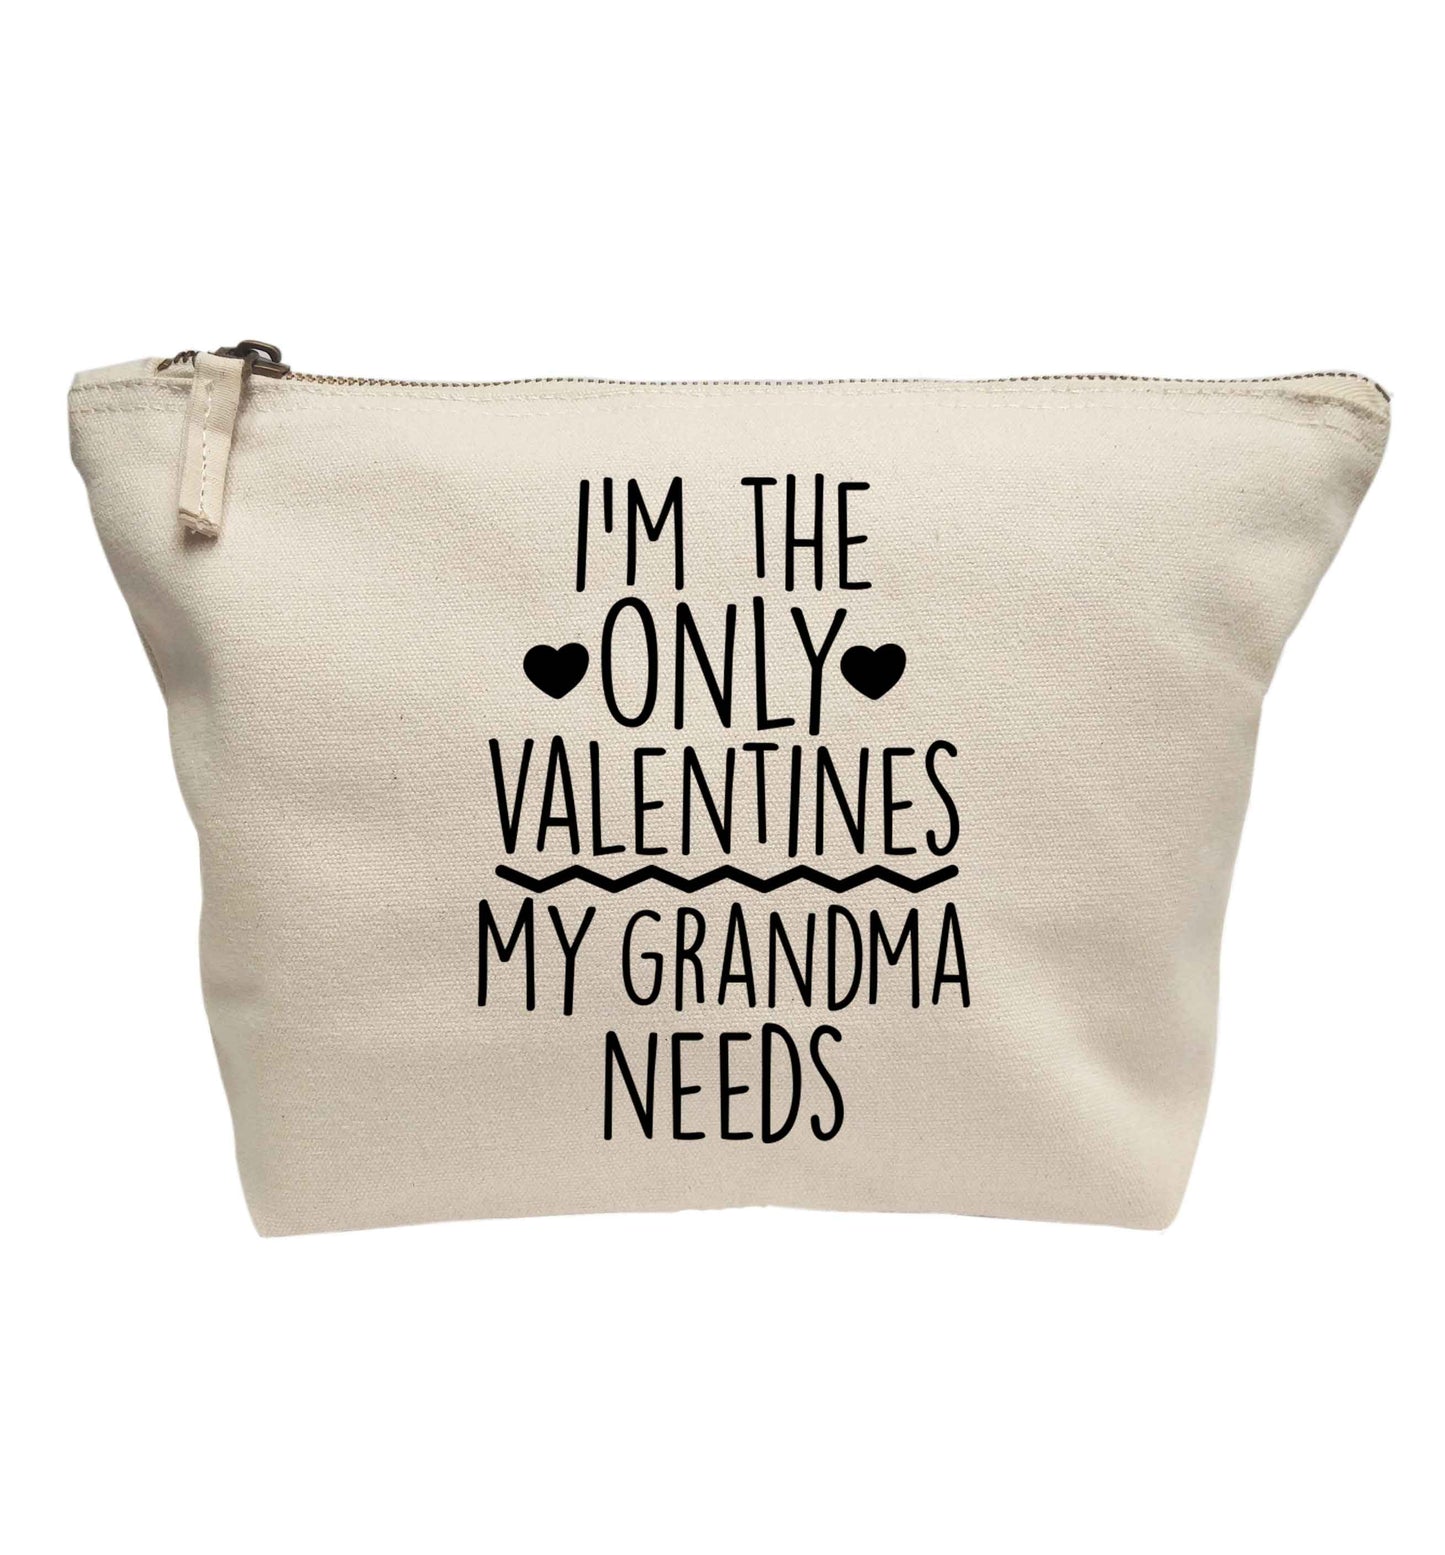 I'm the only valentines my grandma needs | Makeup / wash bag